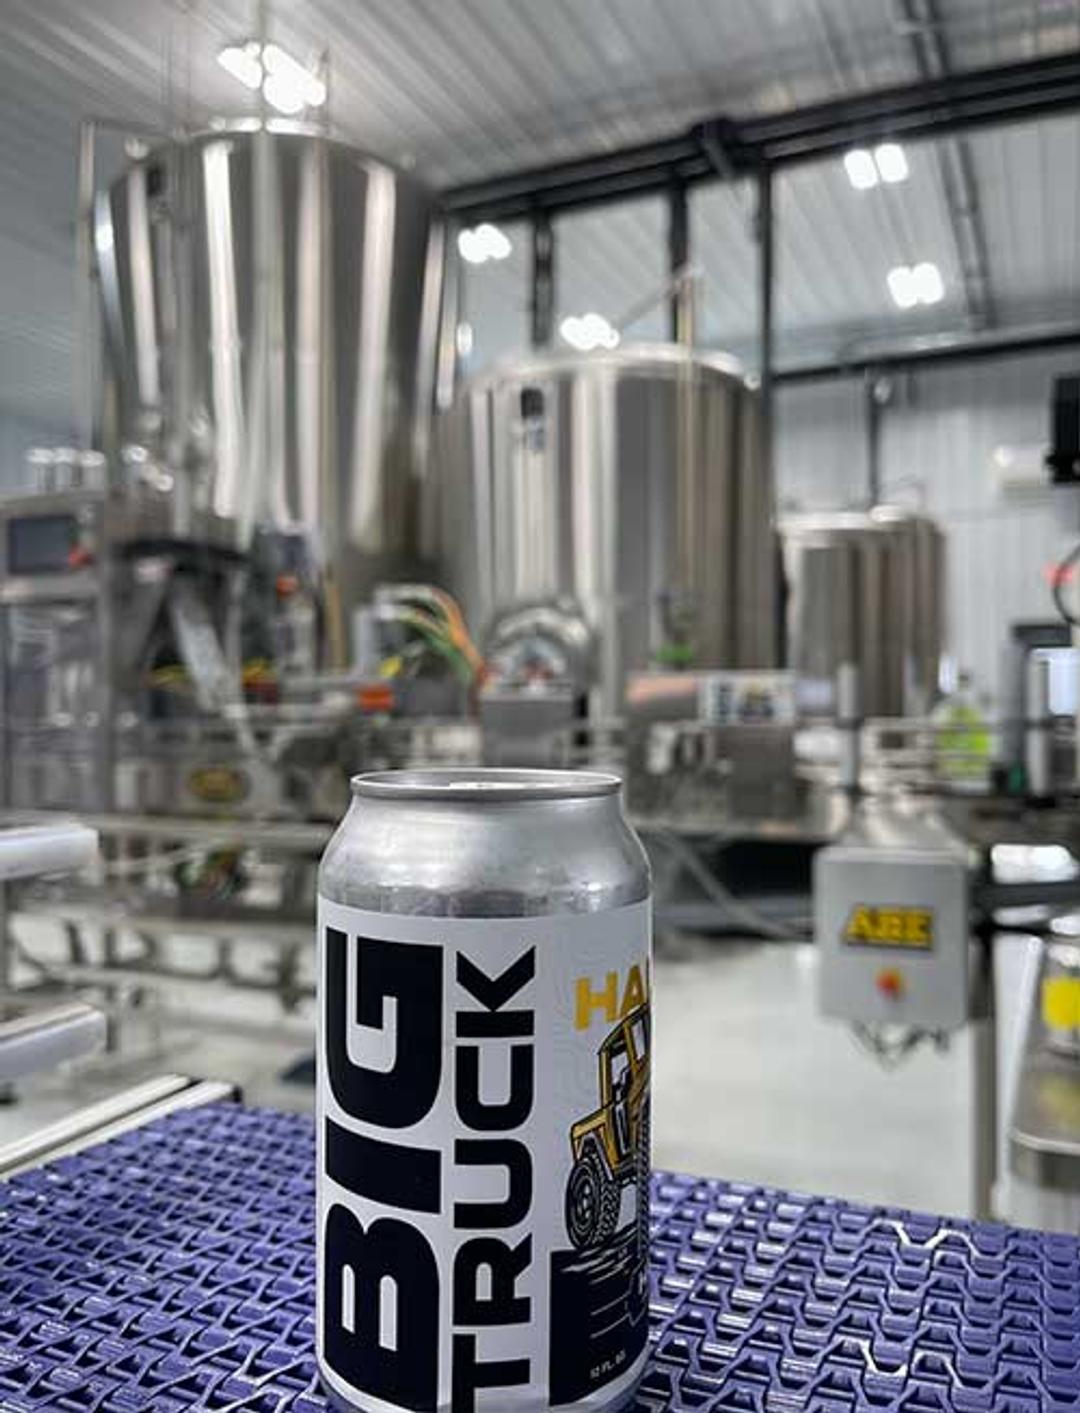 A Big Truck beer can surrounded by brewing equipment